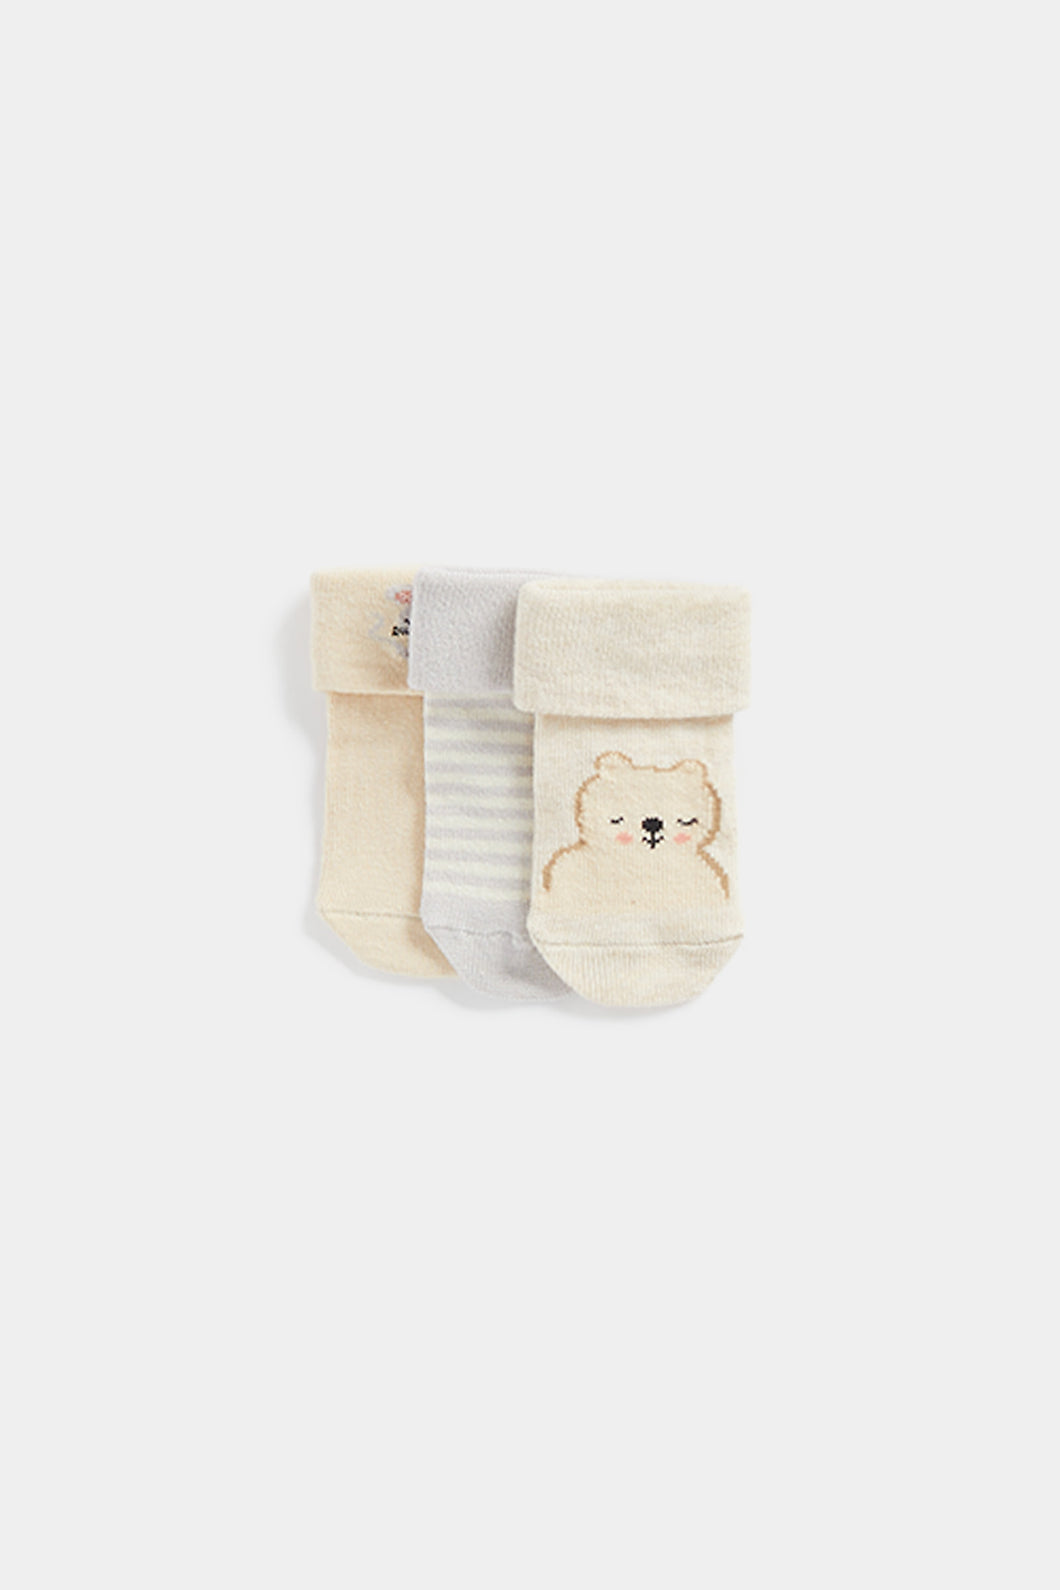 Mothercare Turn-Over-Top Baby Socks - 3 Pack